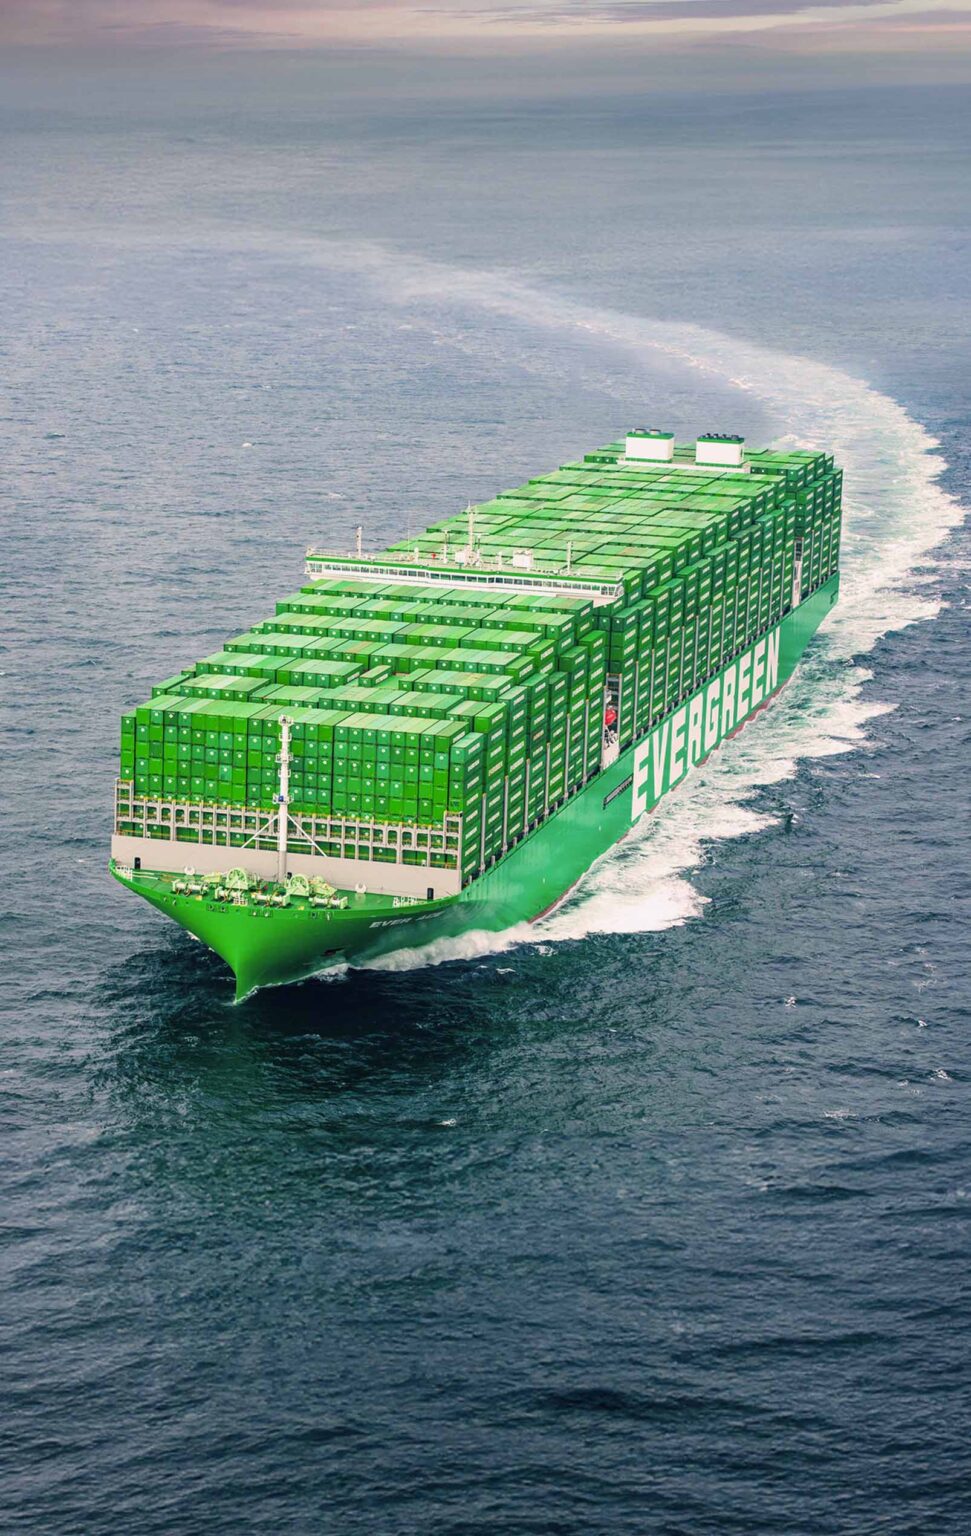 A large, green container ship named "EVERGREEN" is seen from a front-side angle as it navigates through the ocean. The ship's hull is loaded with rows of green containers, and it is cutting through the water, leaving a frothy white trail behind. The ocean around it is a deep blue and the sky above shows a soft gradient from gray to pale pink, possibly indicating early morning or late evening light.